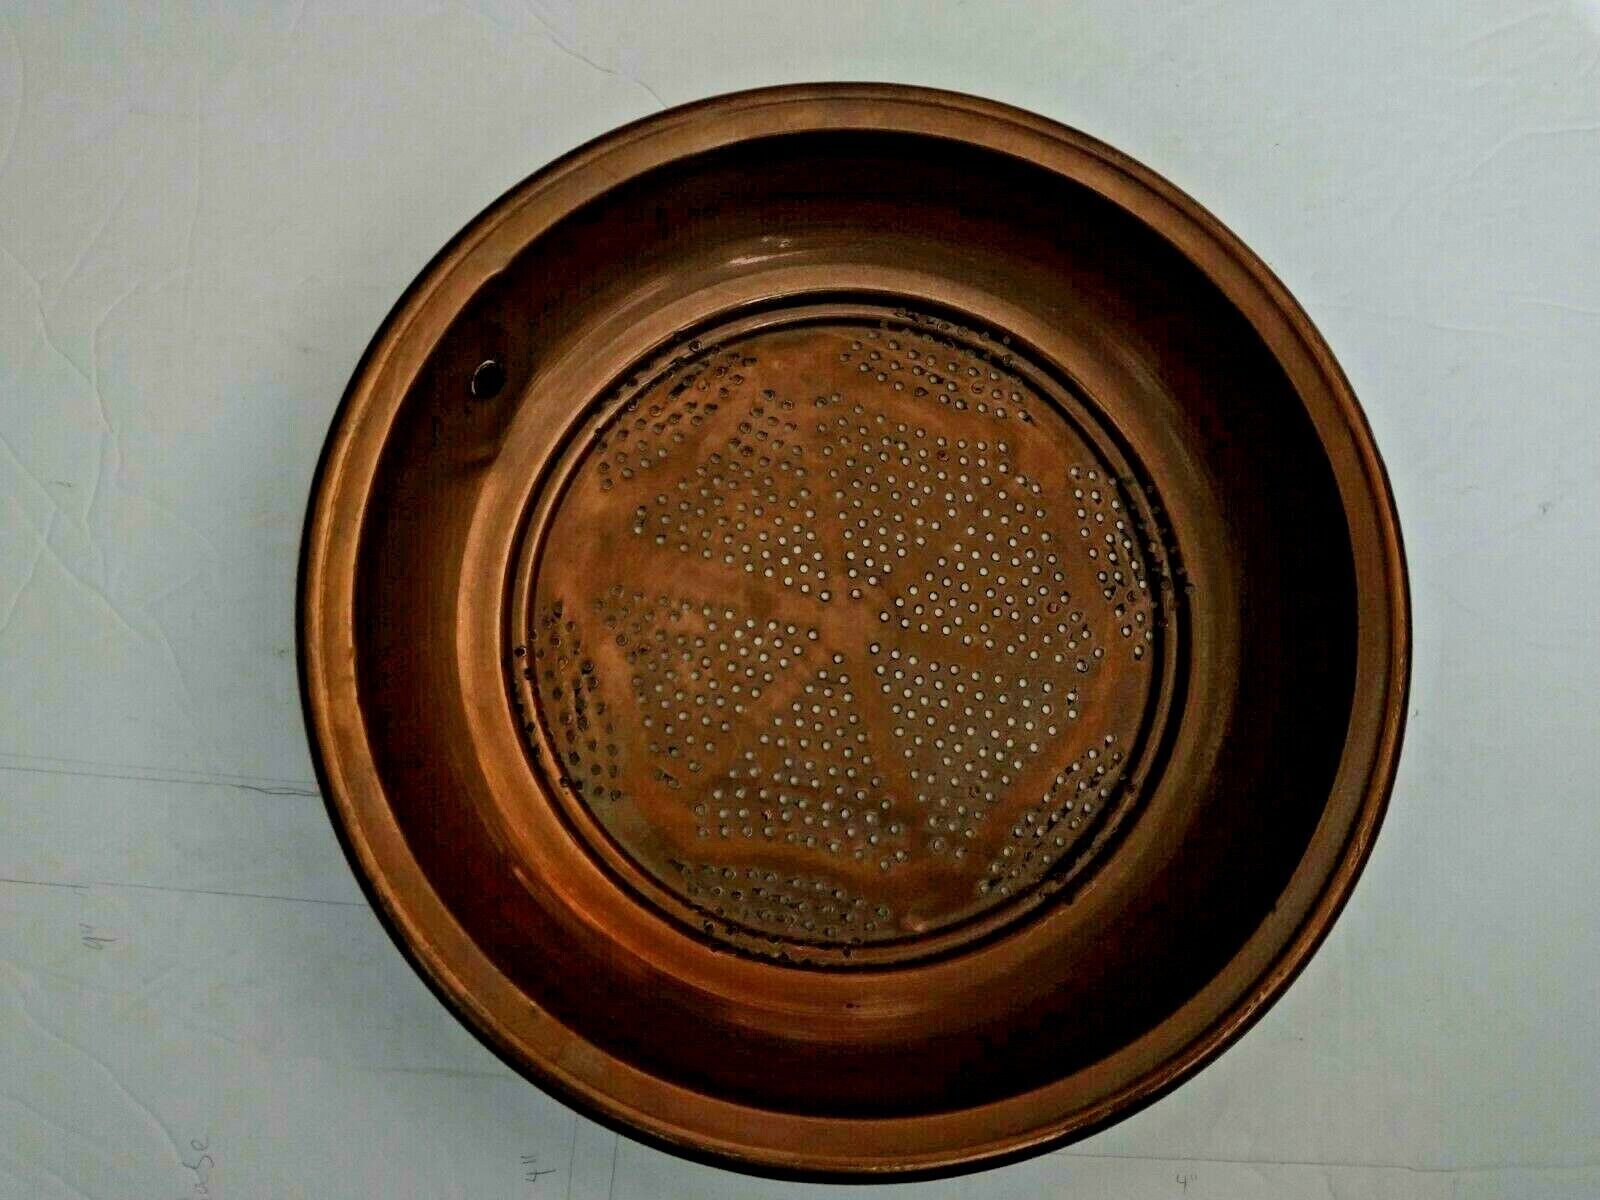 Copper strainer  or colandor  with attached metal  ring